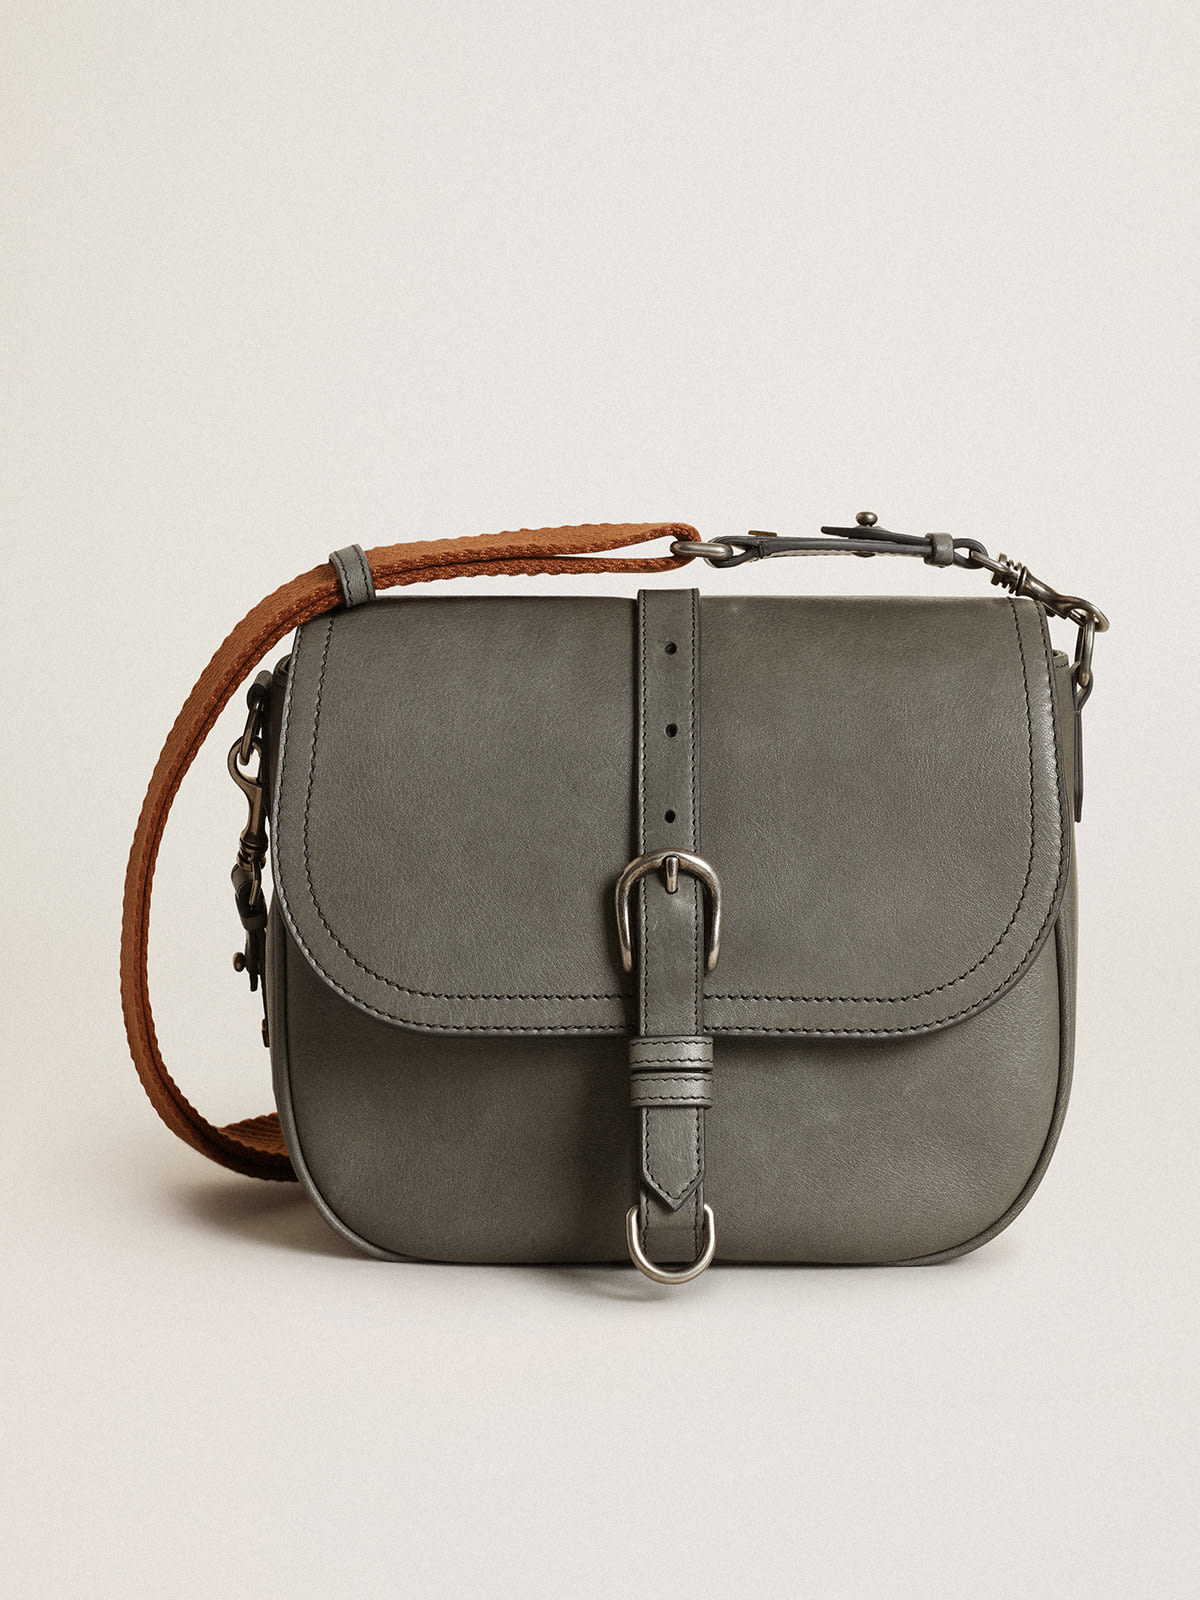 Golden Goose - Medium Sally Bag in stone-gray leather with contrasting buckle and shoulder strap in 